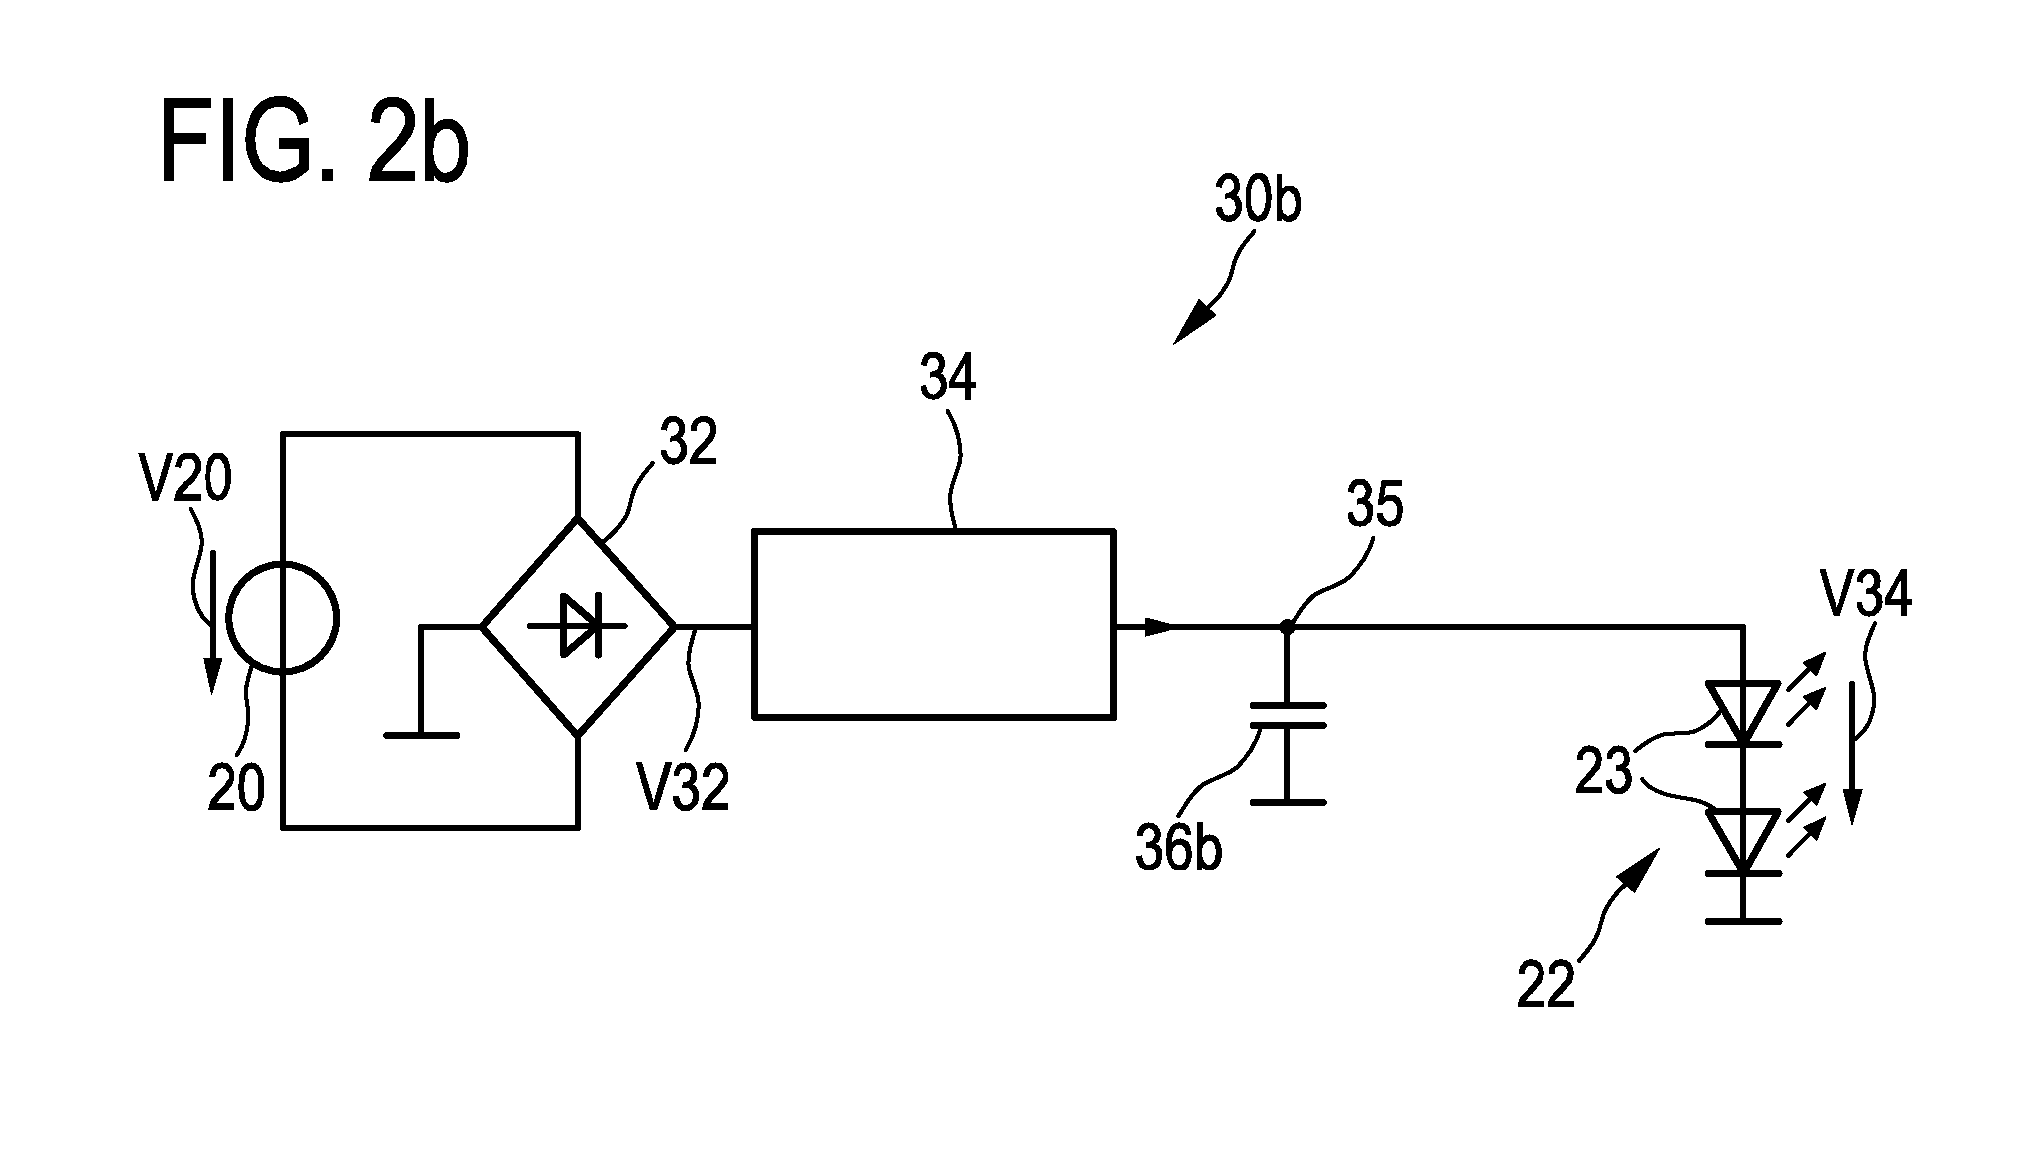 Dc-dc driver device having input and output filters, for driving a load, in particular an LED unit